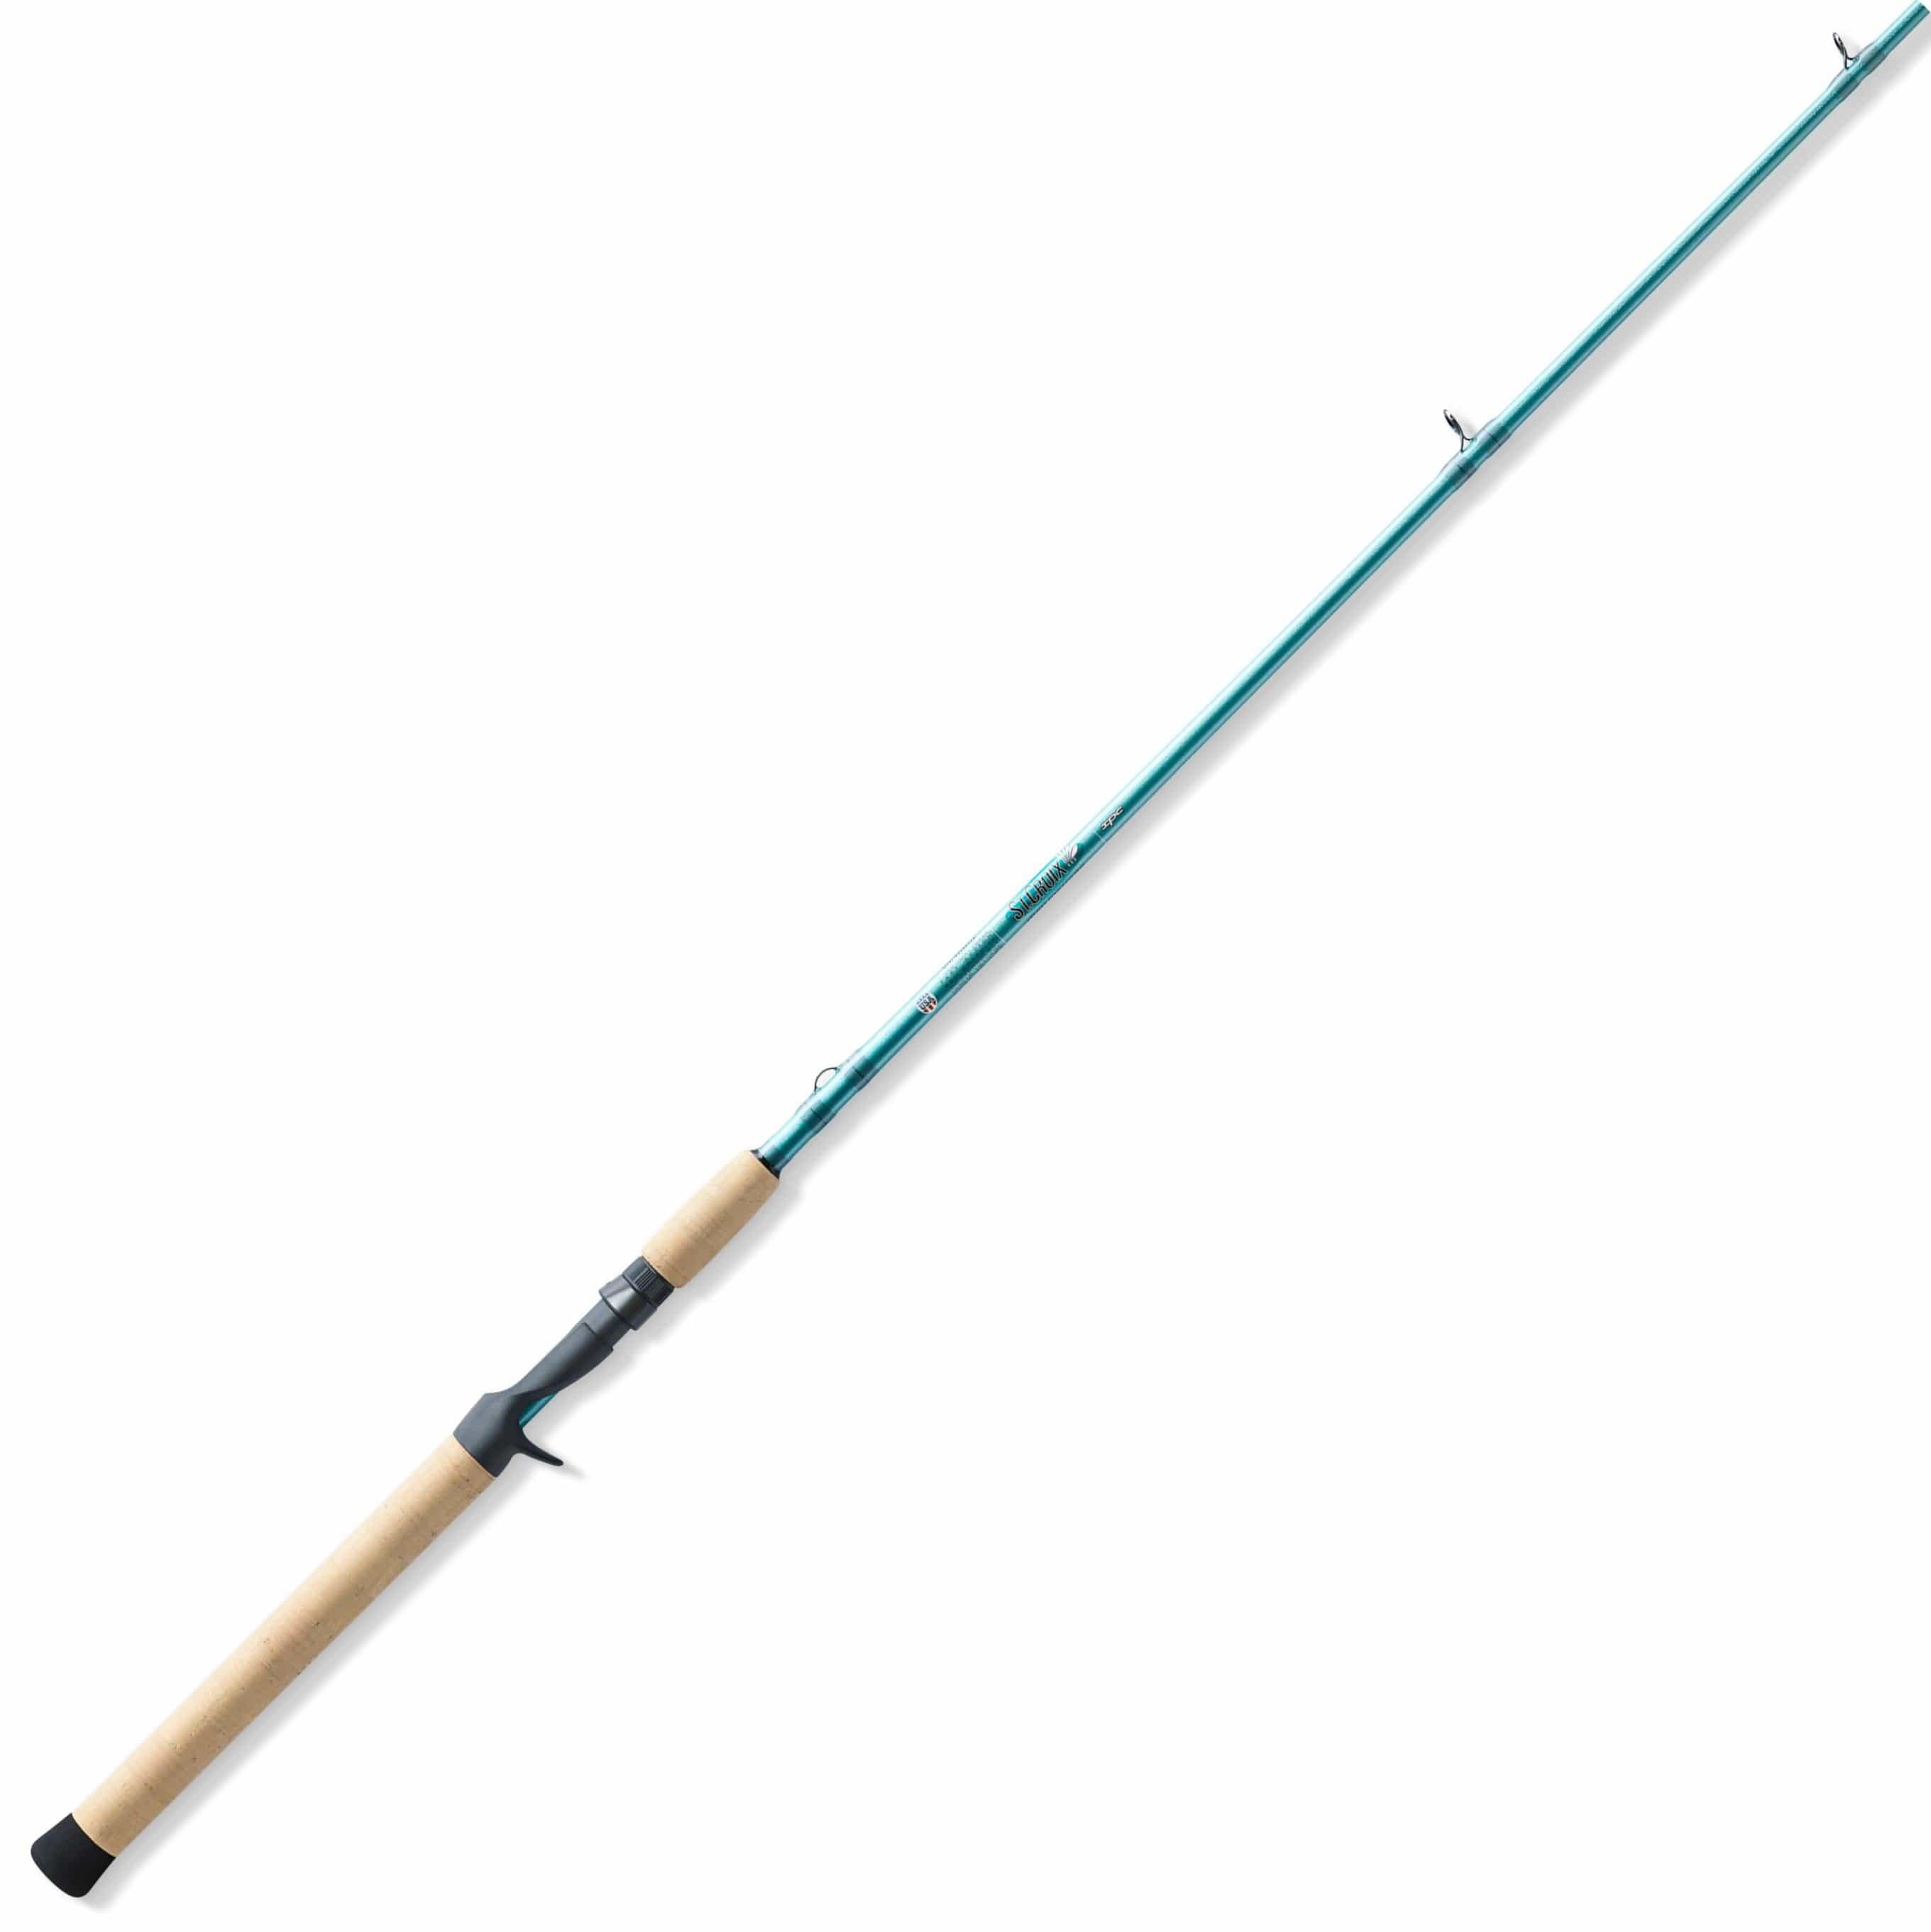 St Croix Rods - The Saltwater Edge